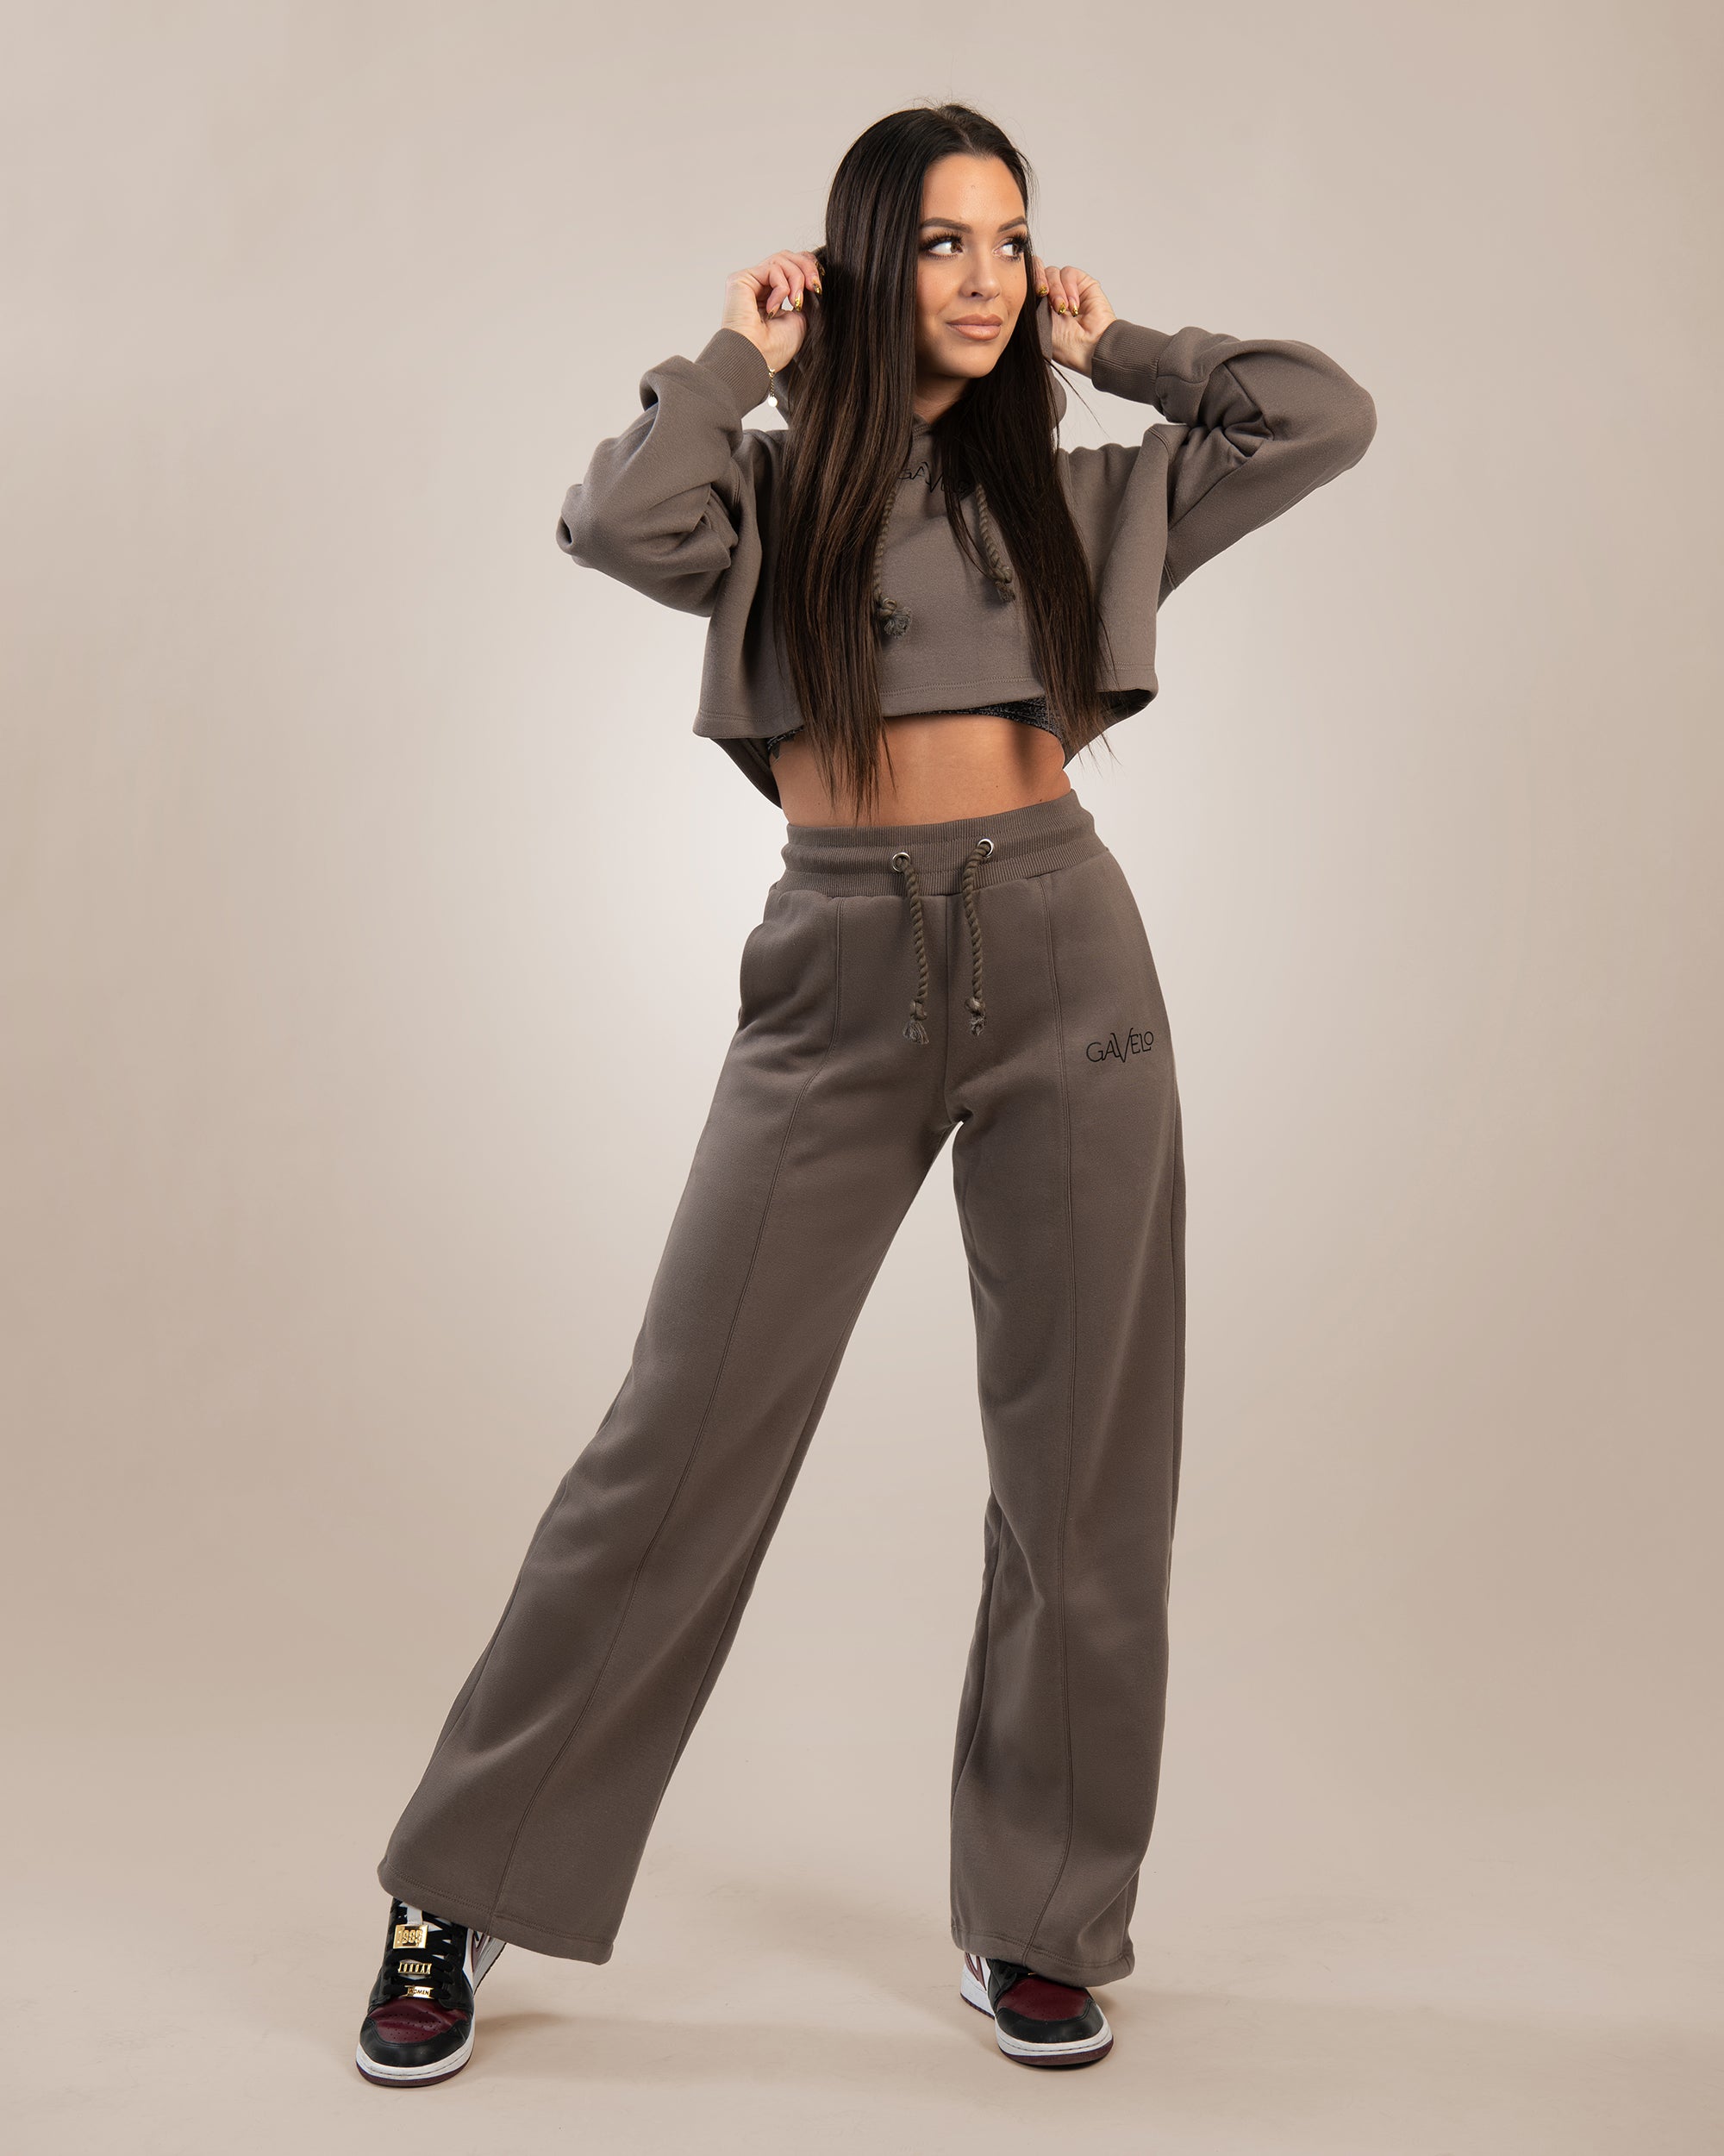 GAVELO Chill Lounge Pant Taupe